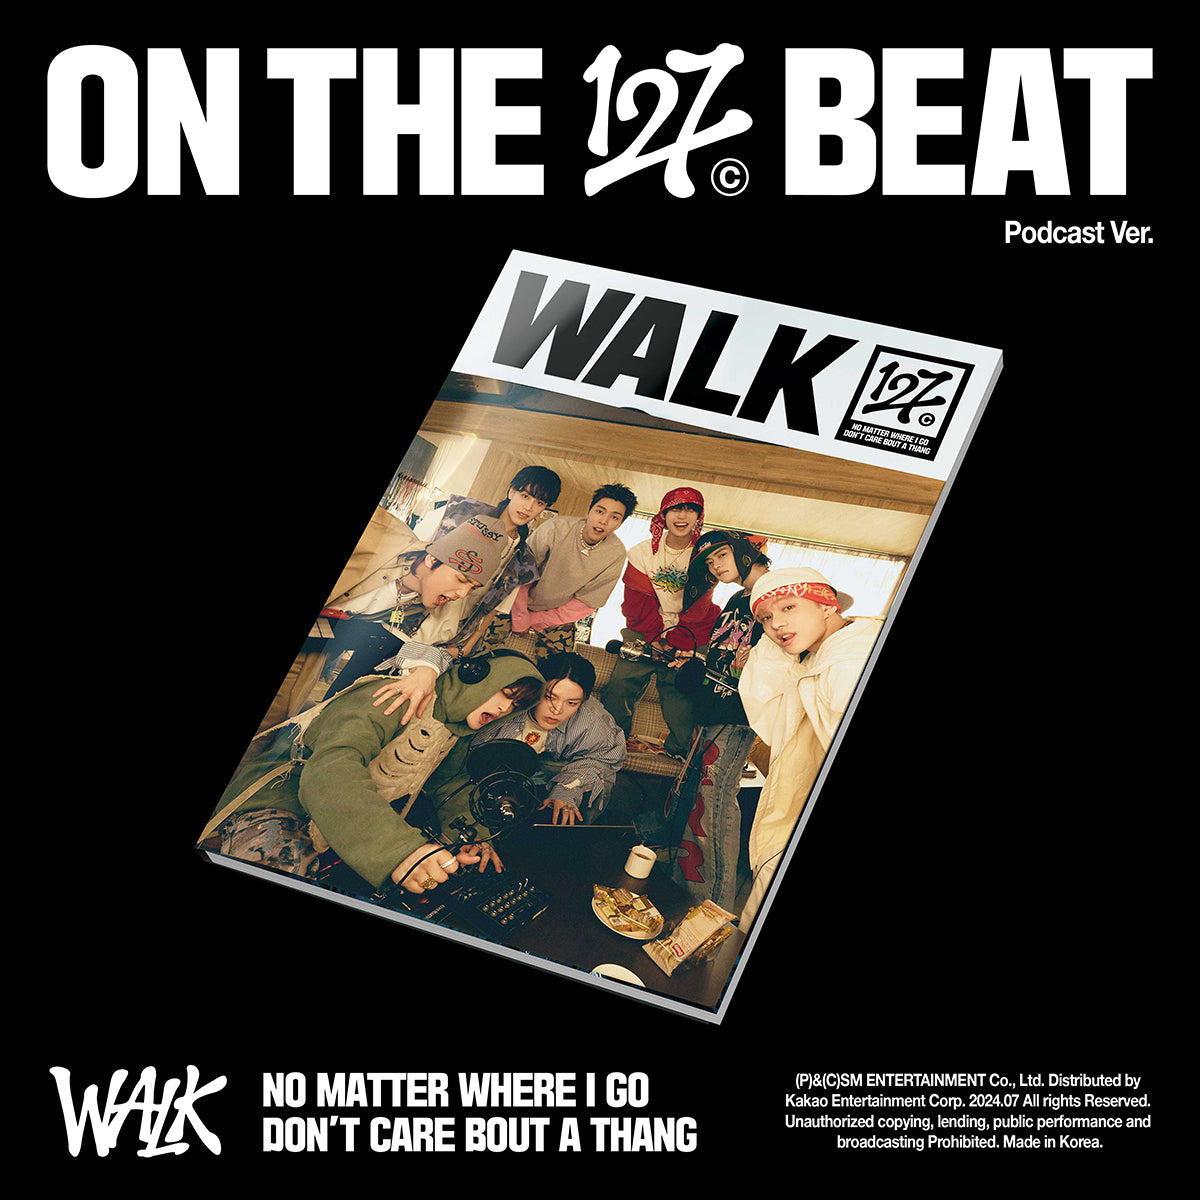 NCT 127 - WALK (Podcast Ver.) [PRE-ORDER]